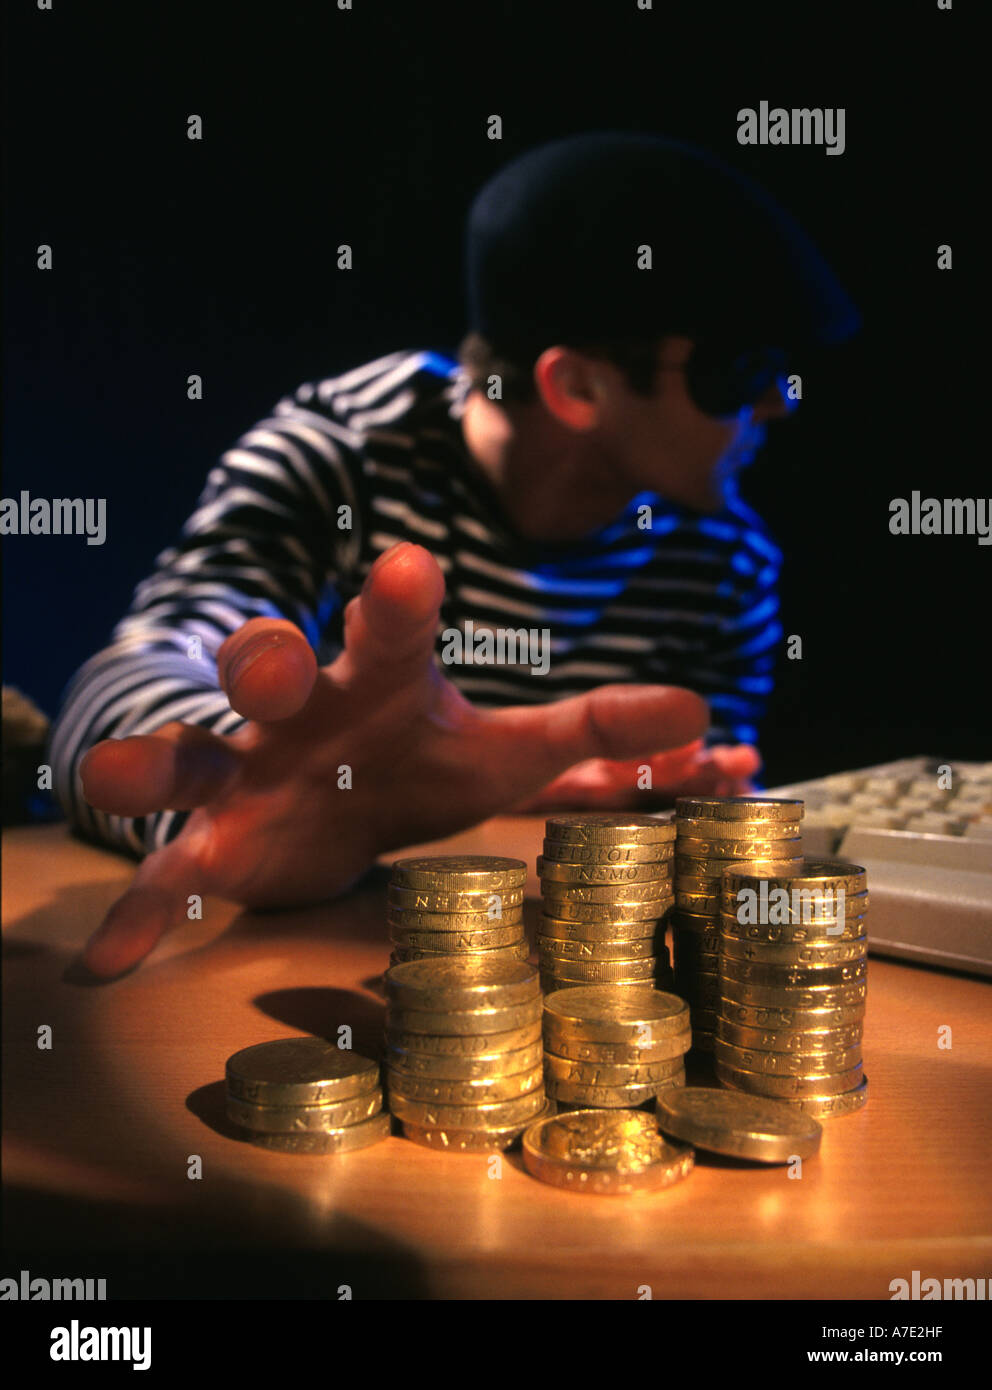 Burglar in traditional costume.Burglar stealing a pile of coins Stock Photo